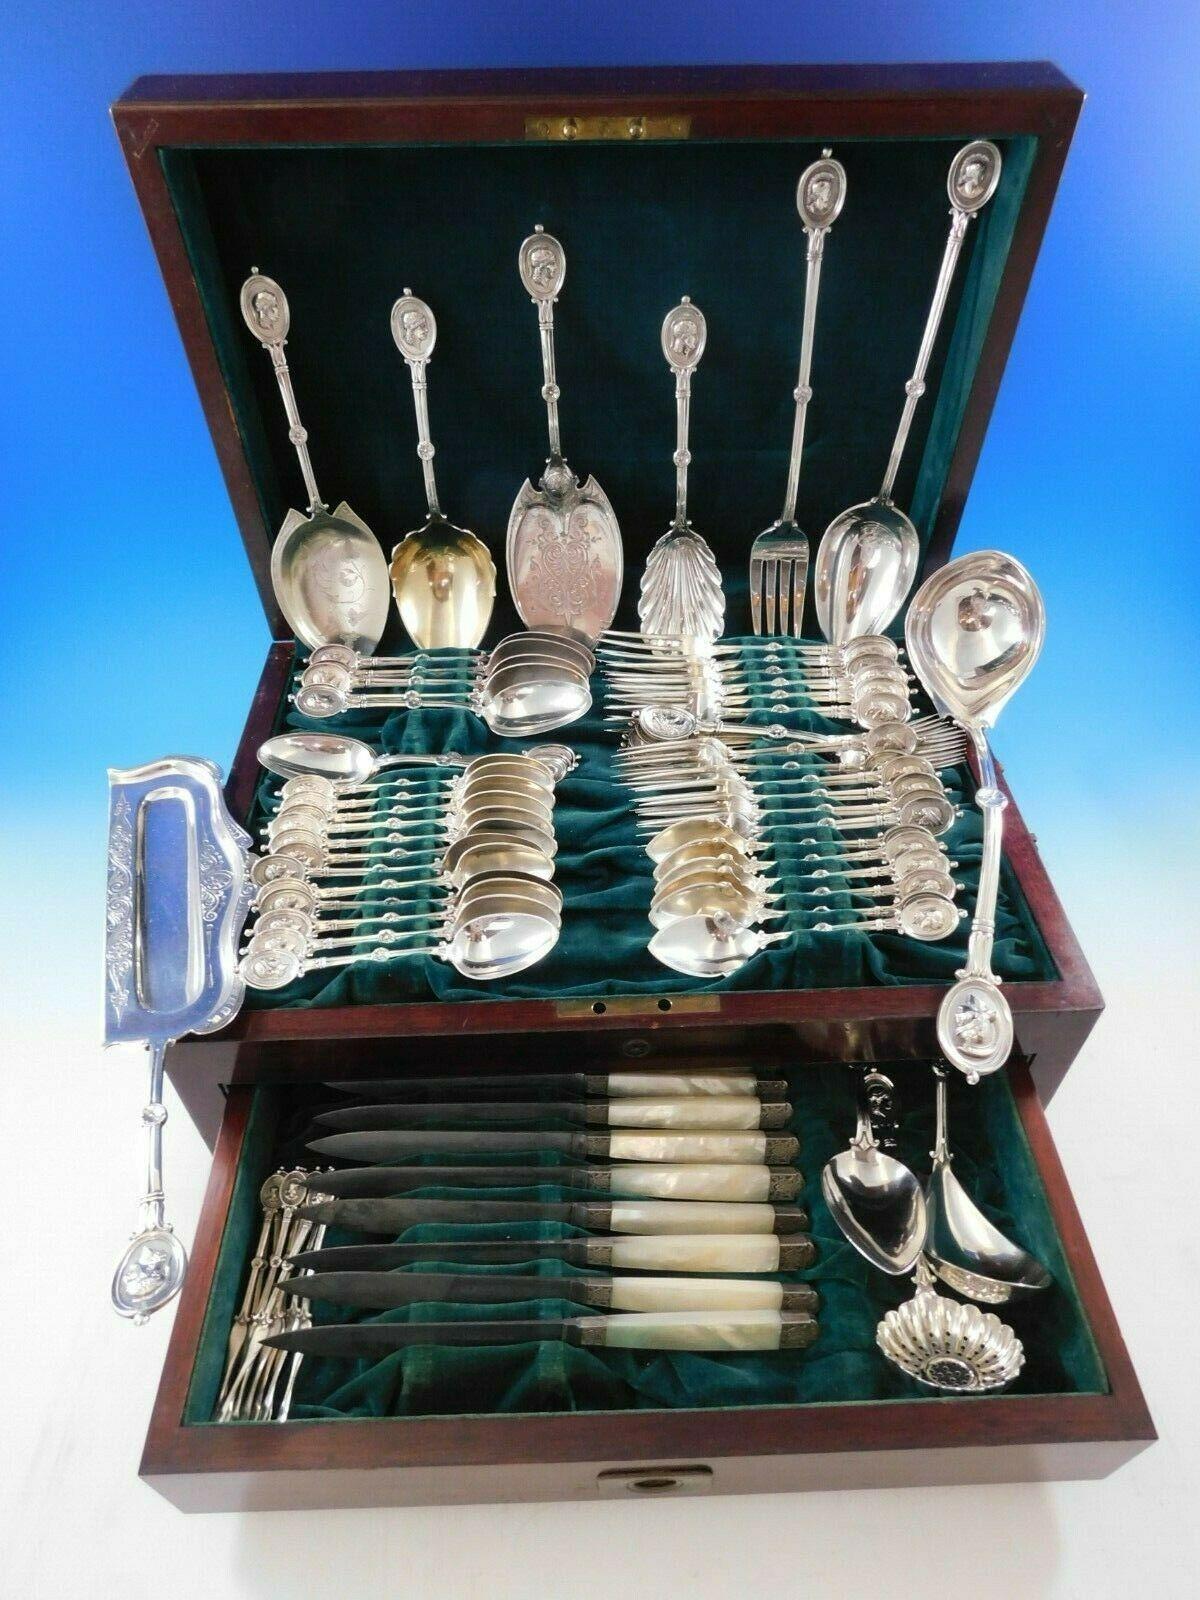 Rare multi-motif Medallion by Wendt sterling silver flatware set - 79 pieces. This set includes:

12 knives, mother of pearl handle (some wear to steel blades, as expected with age), 8 1/2